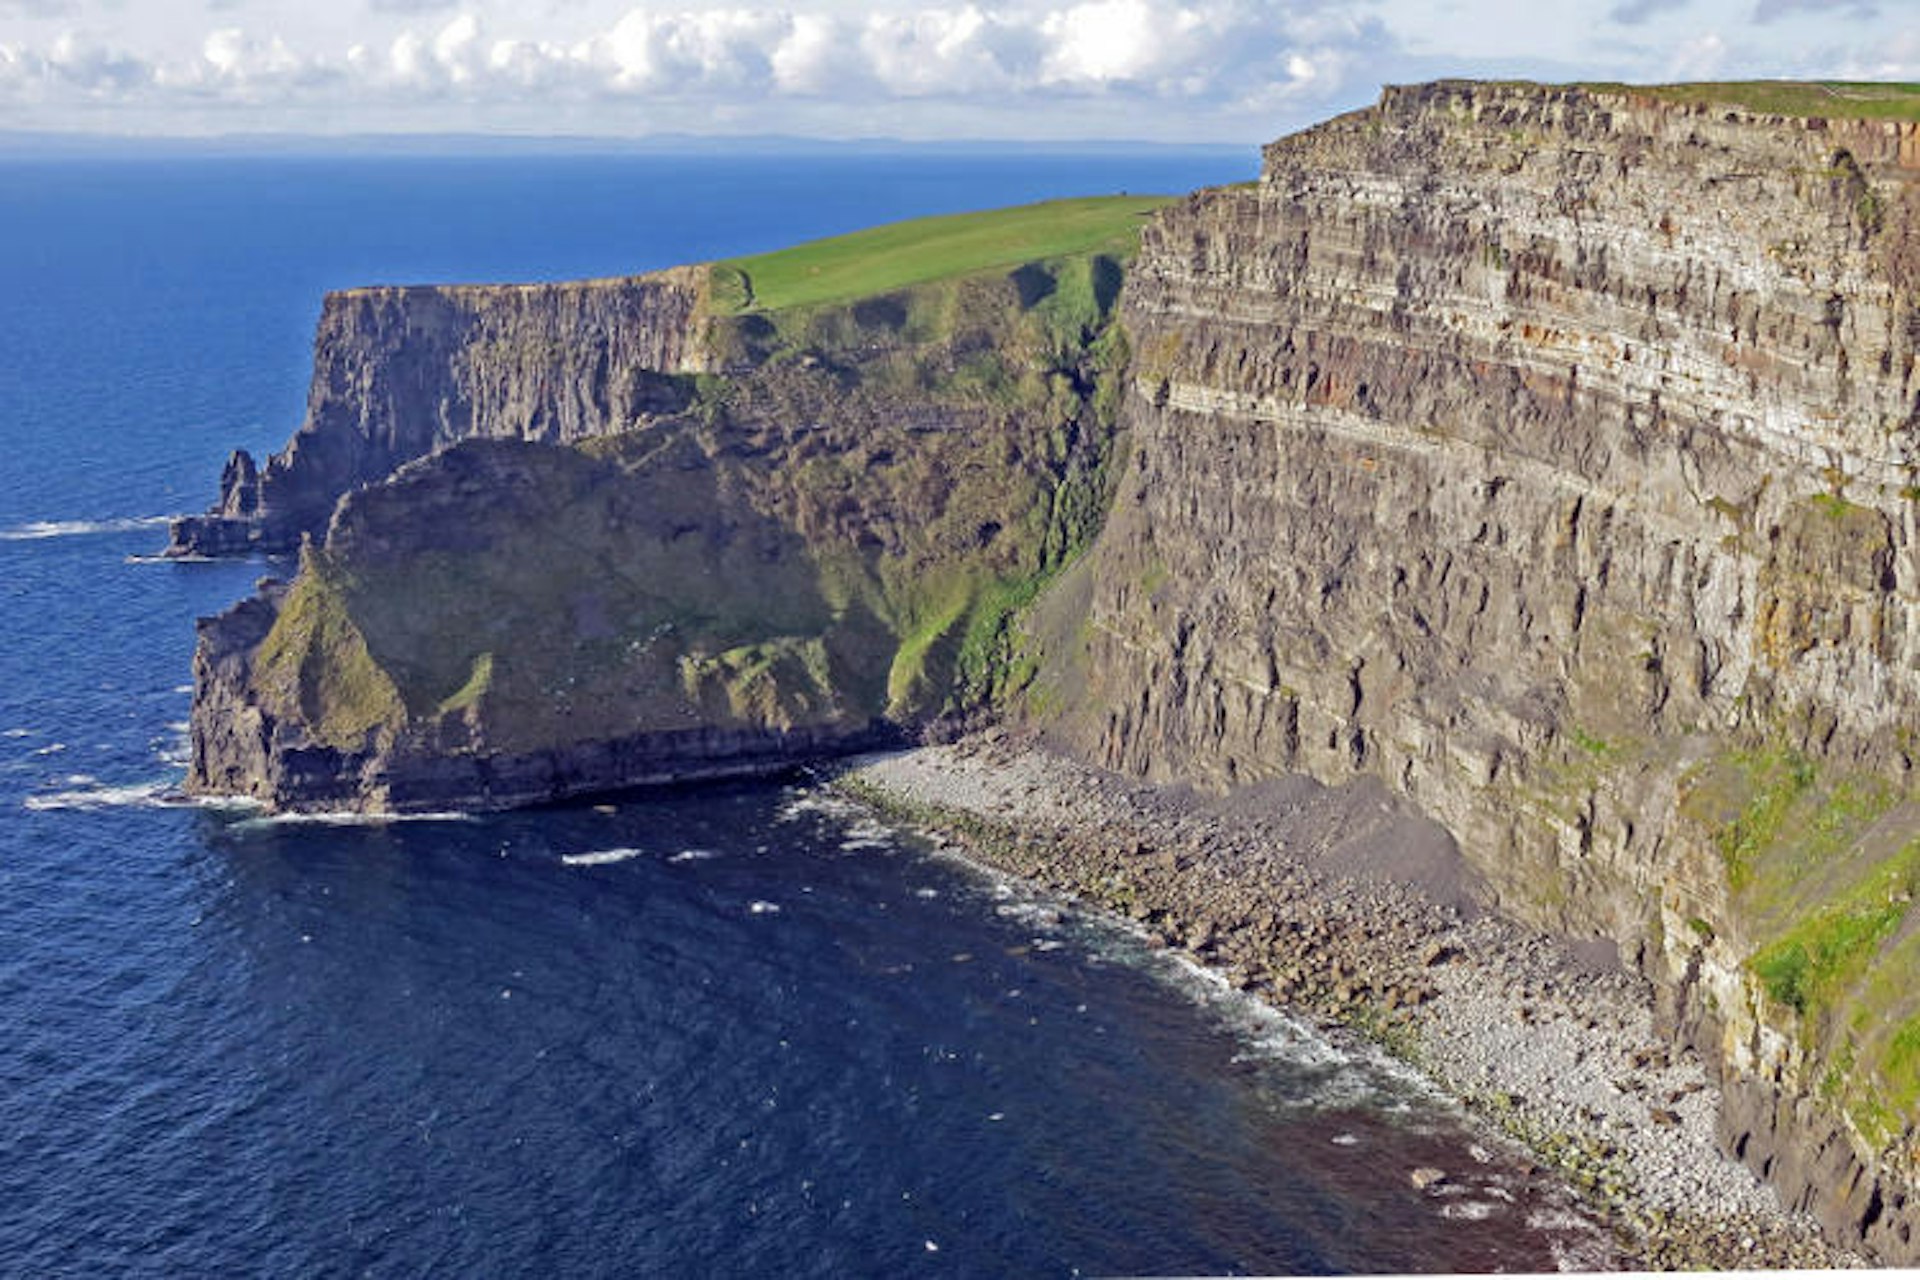 The Cliffs of Moher. Image by Alex Ranaldi / CC BY-SA 2.0